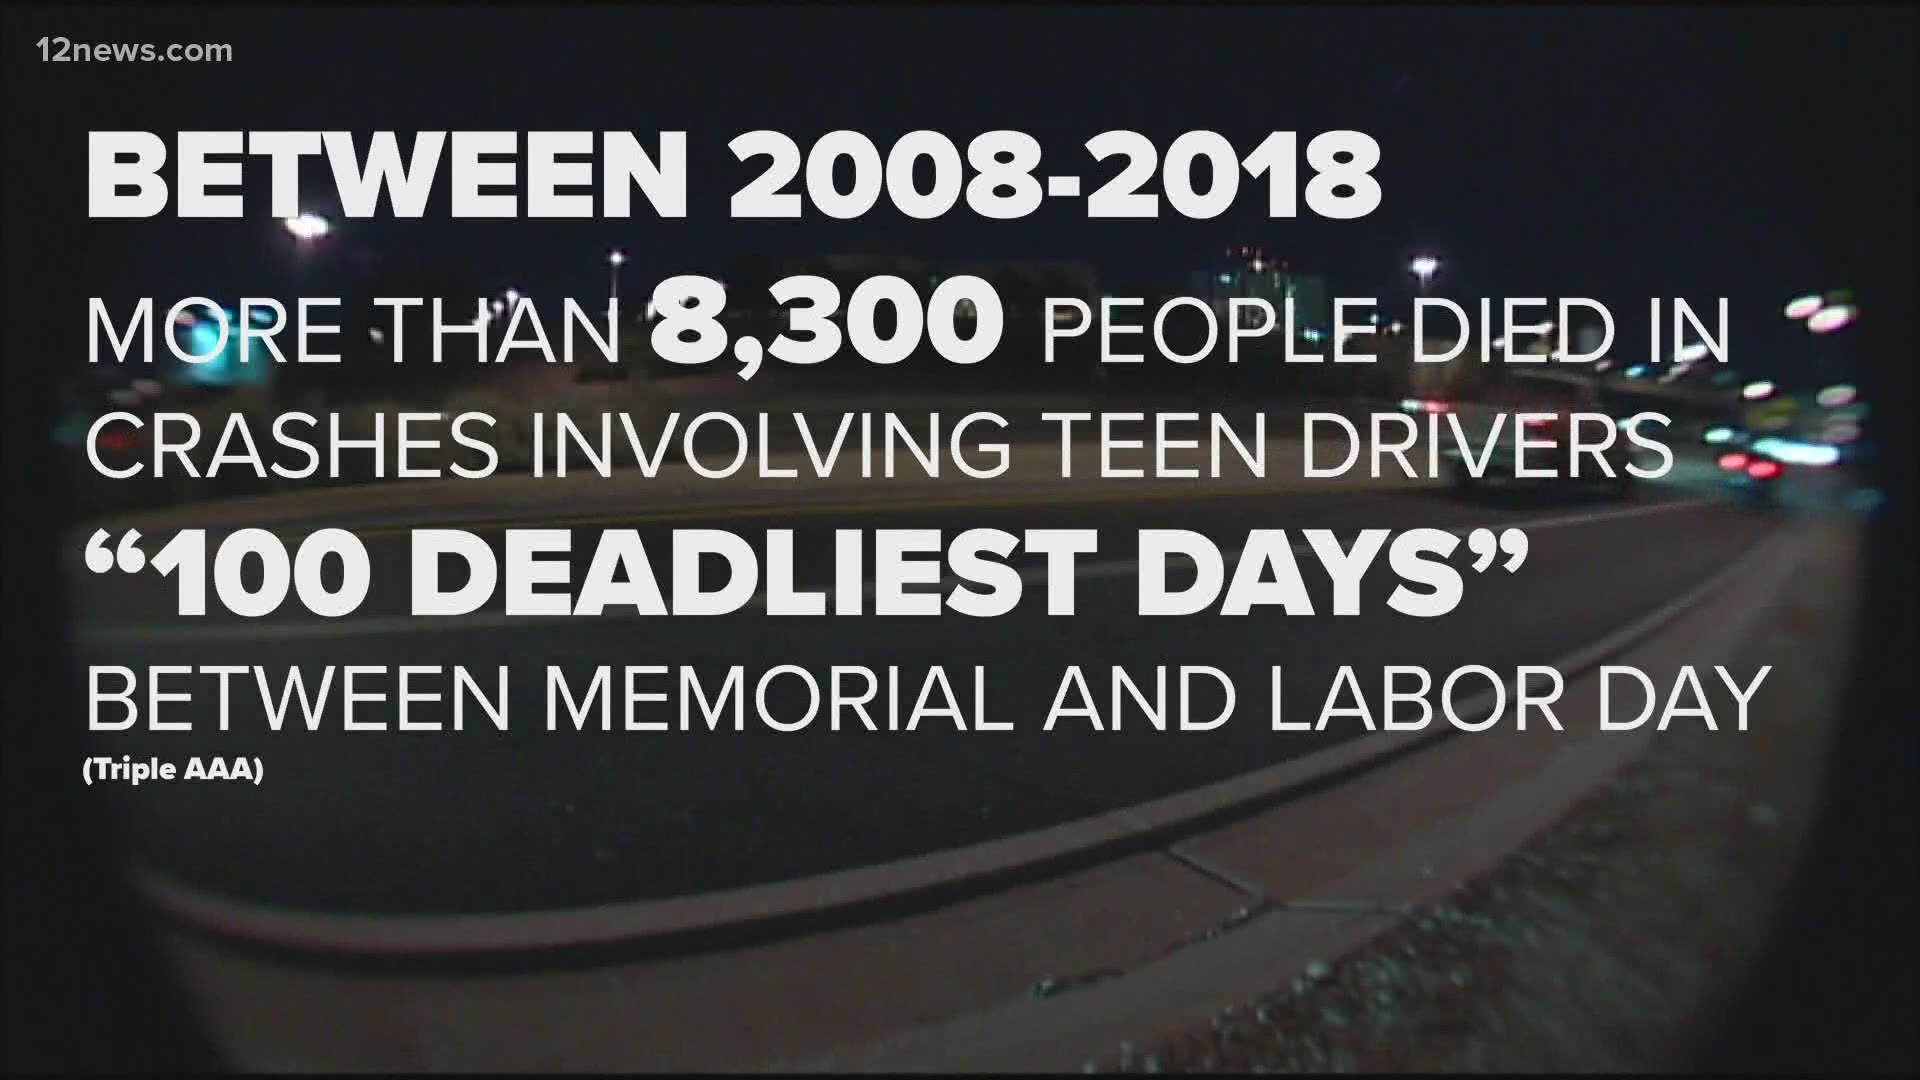 The summer months are the deadliest for teen drivers. Professionals are trying to combat this.